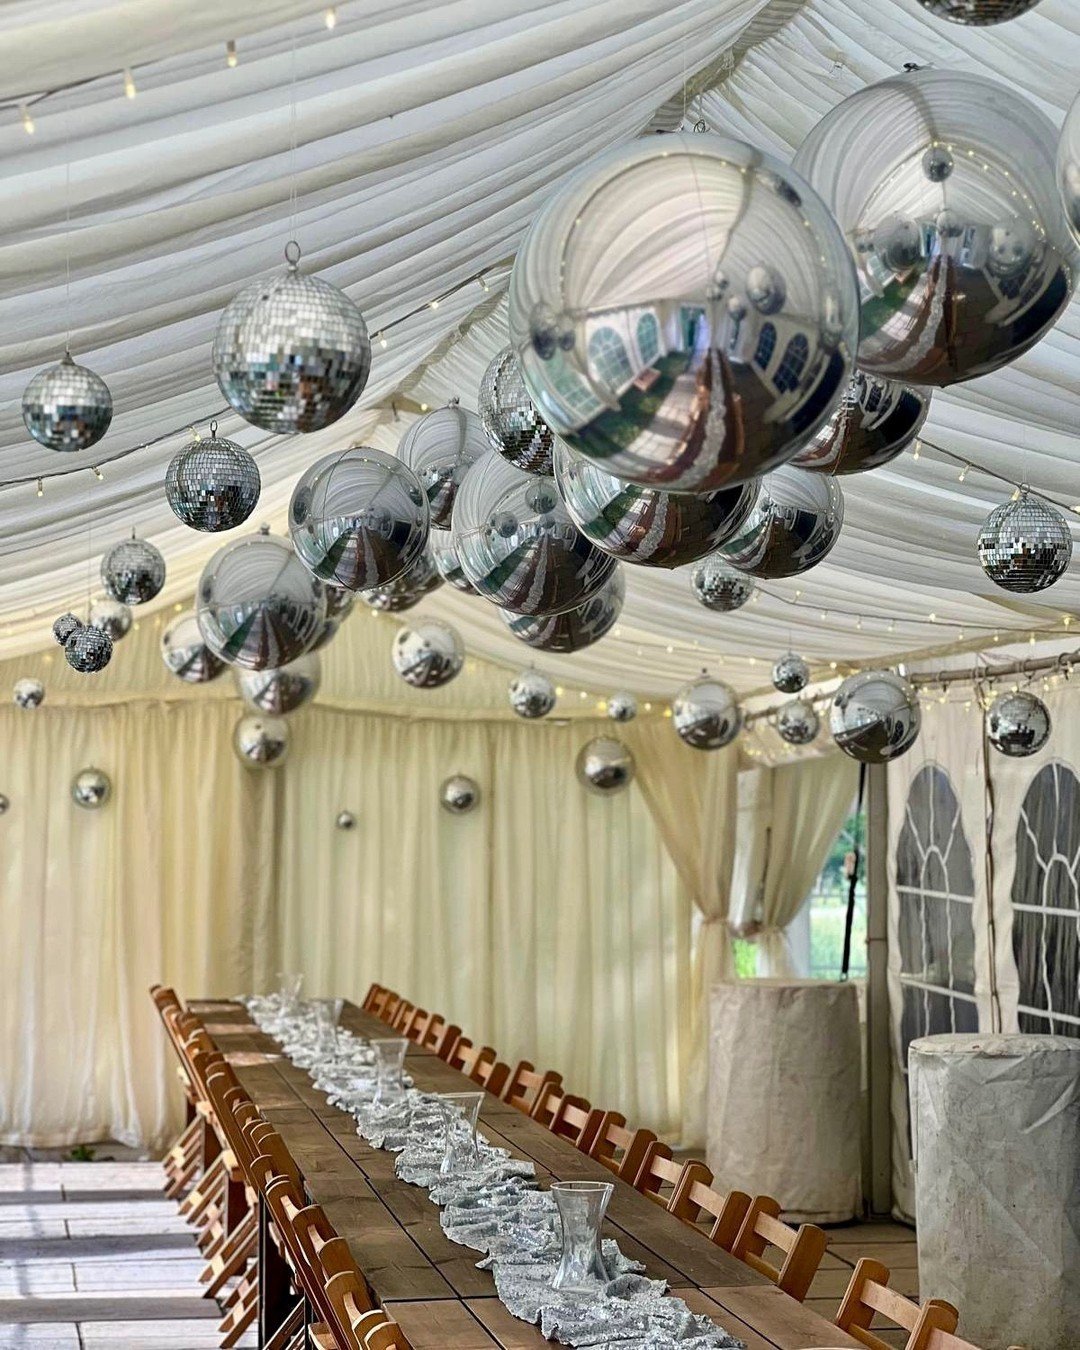 Such a fab way to make a statement, our balloon ceiling really add that extra something special to any event space.